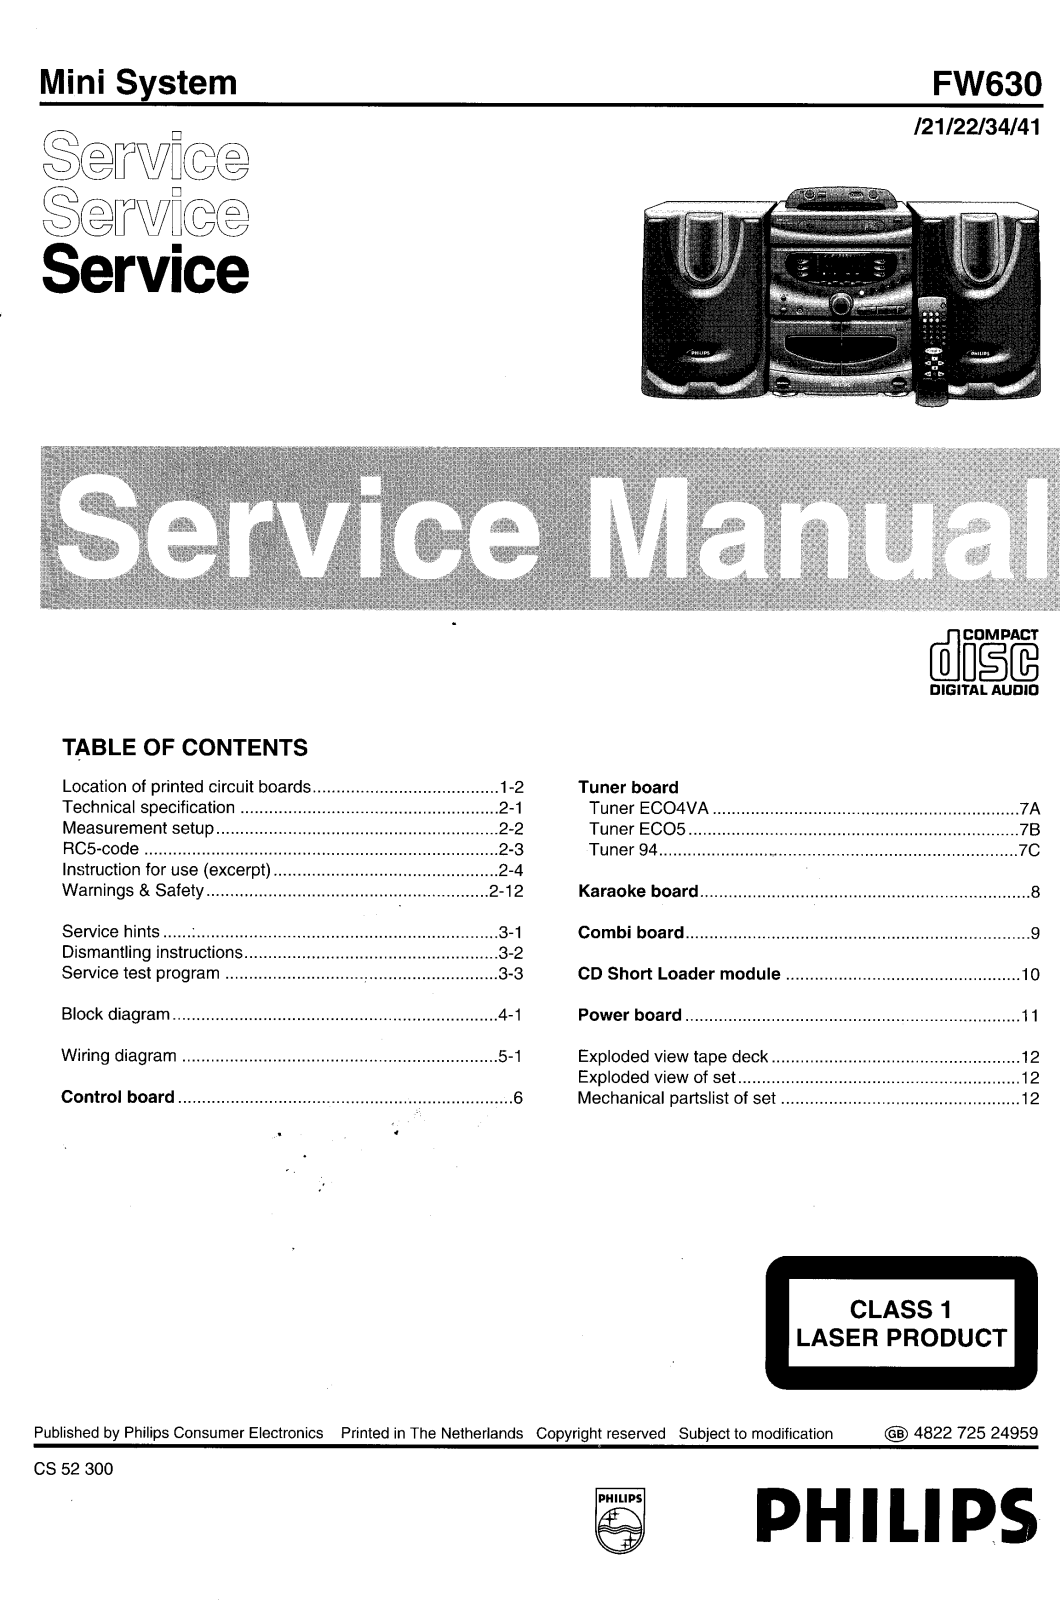 Philips FW-630 Service Manual